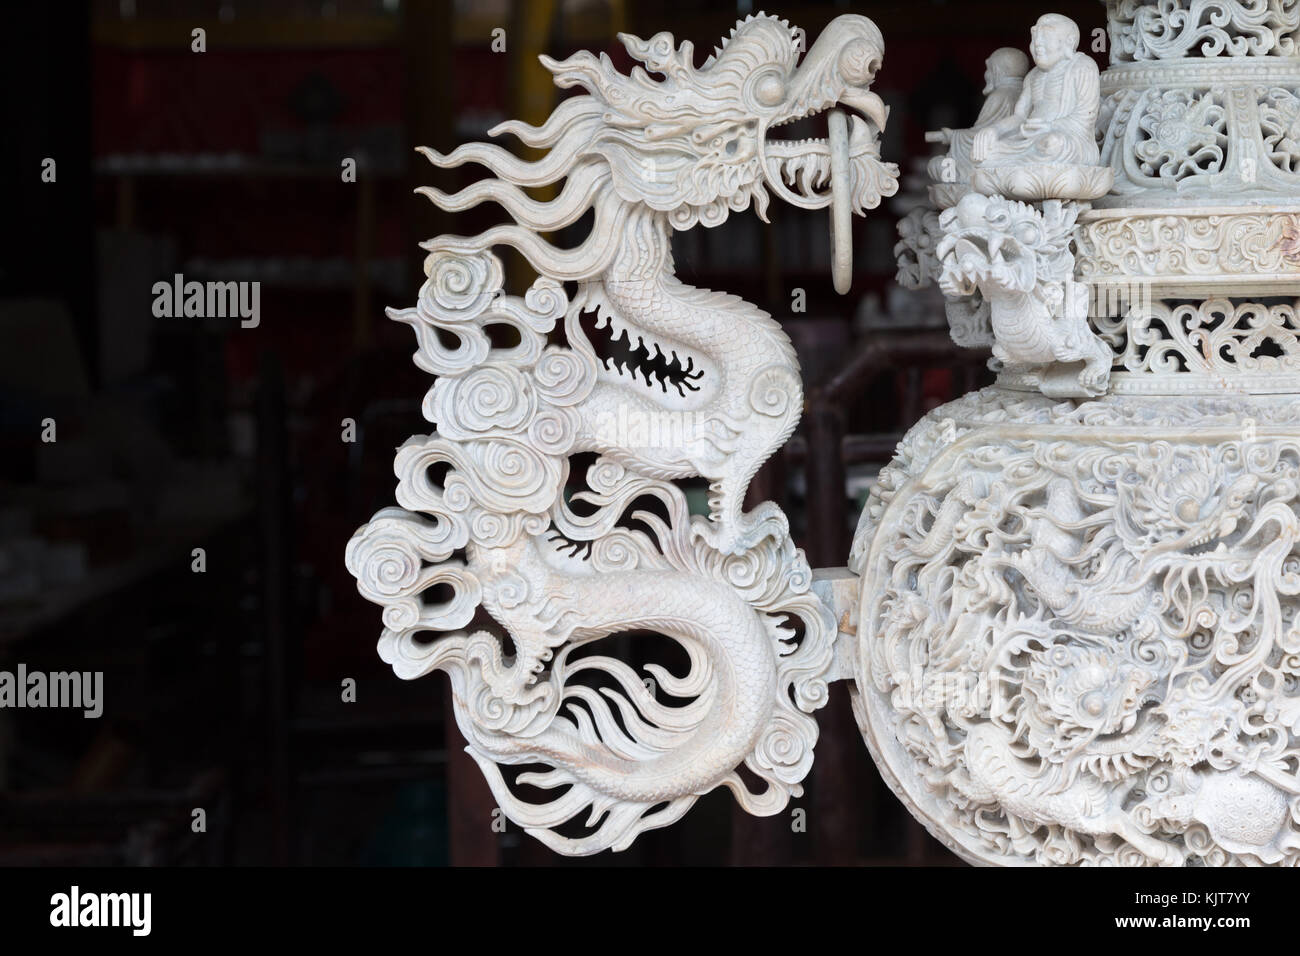 Detail of an ornate handle in the shape of a dragon on an asian vase in Sapa, Vietnam Stock Photo